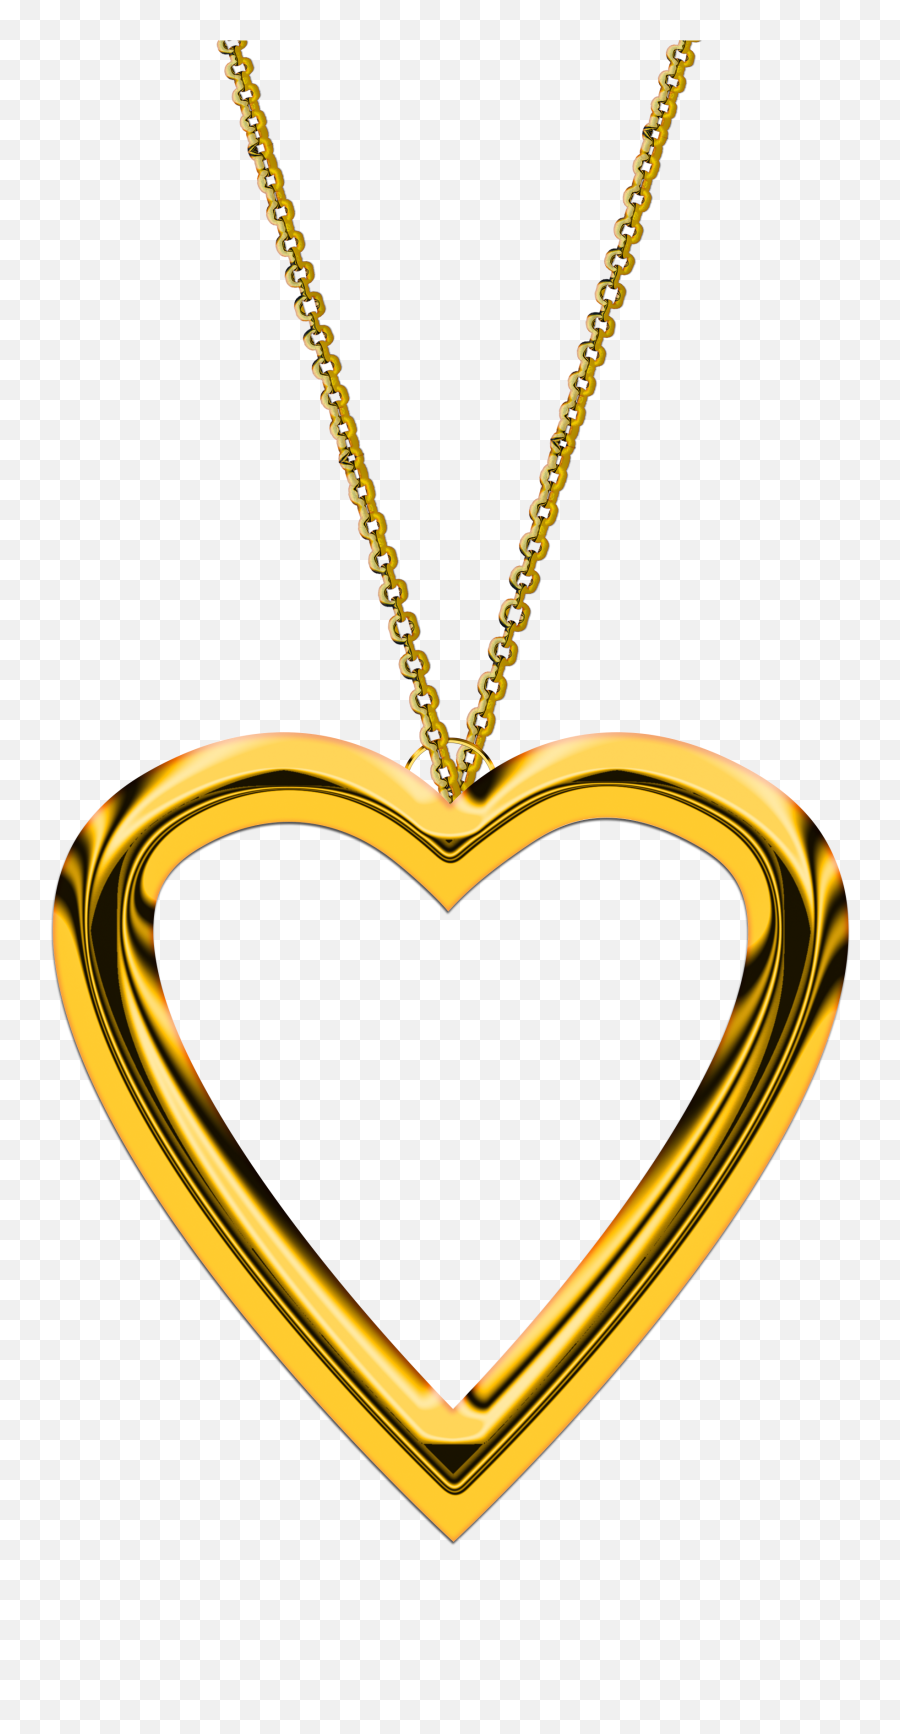 Shining Heart Shaped Gold Pendant On A Chain At White - Gold Heart Pendant Png Emoji,Necklace For Emotions